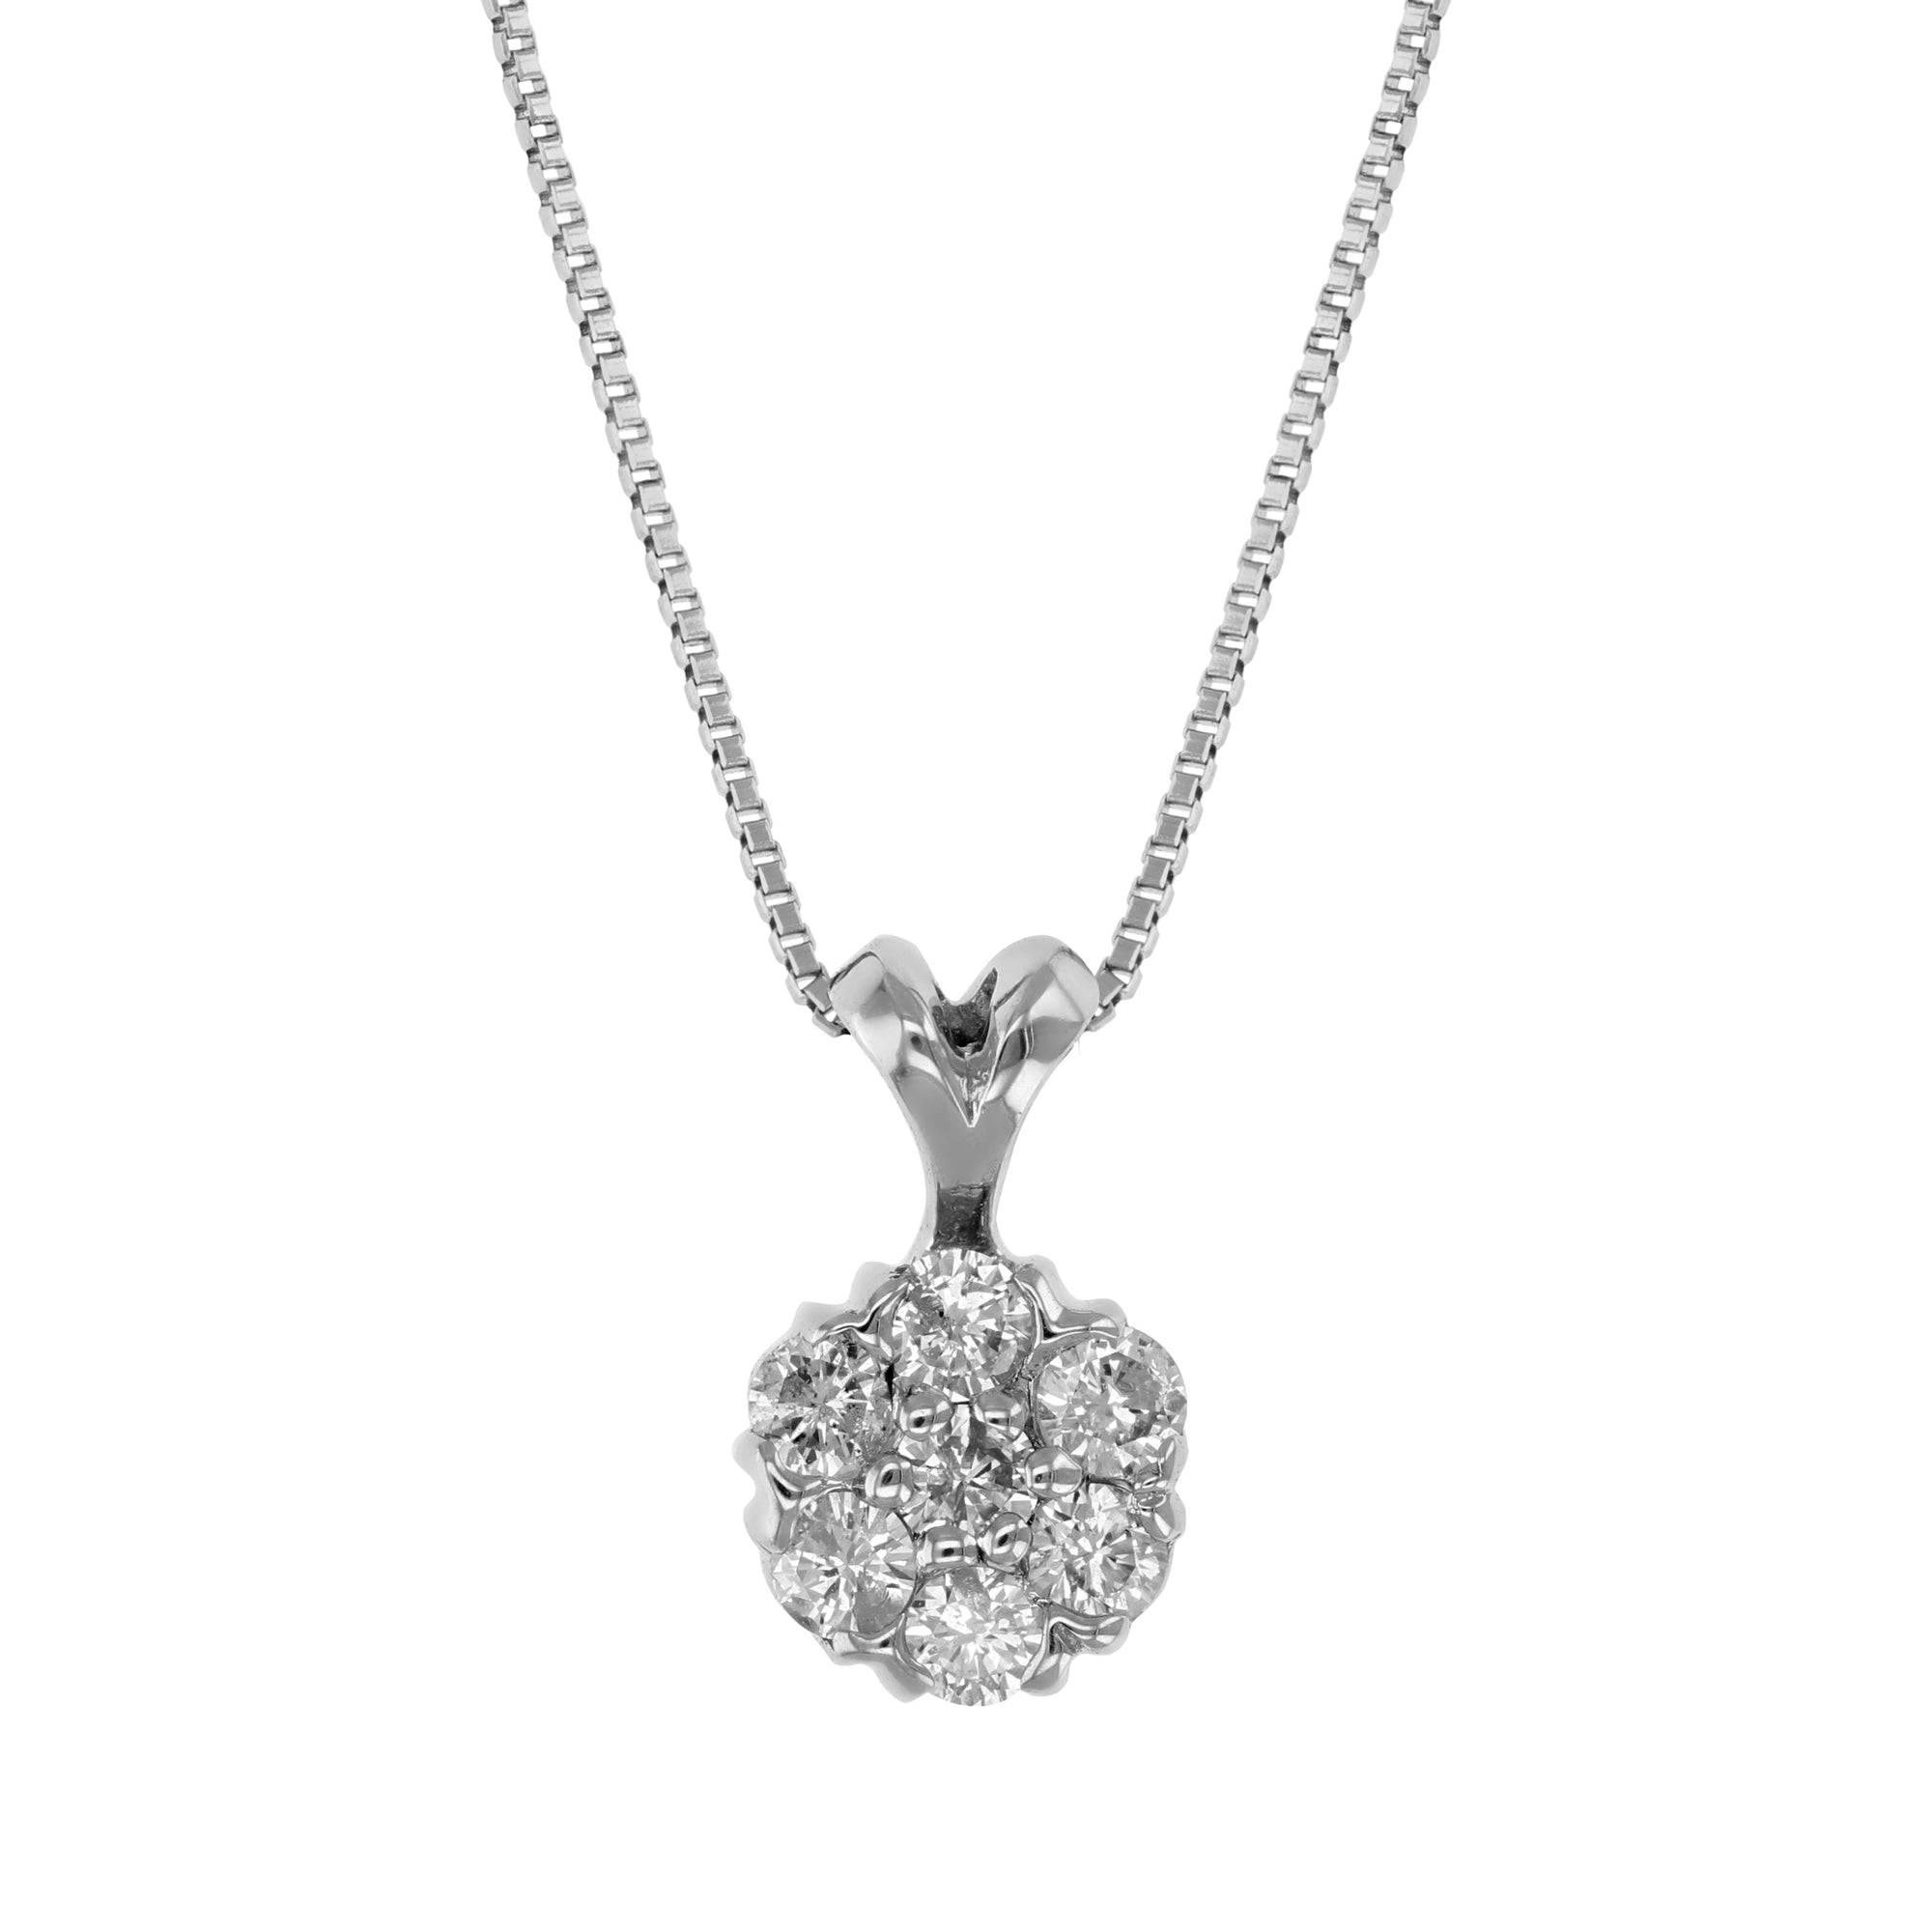 1/5 cttw Diamond Pendant, Diamond Cluster Pendant Necklace for Women in 14K White Gold with 18 Inch Chain, Prong Setting